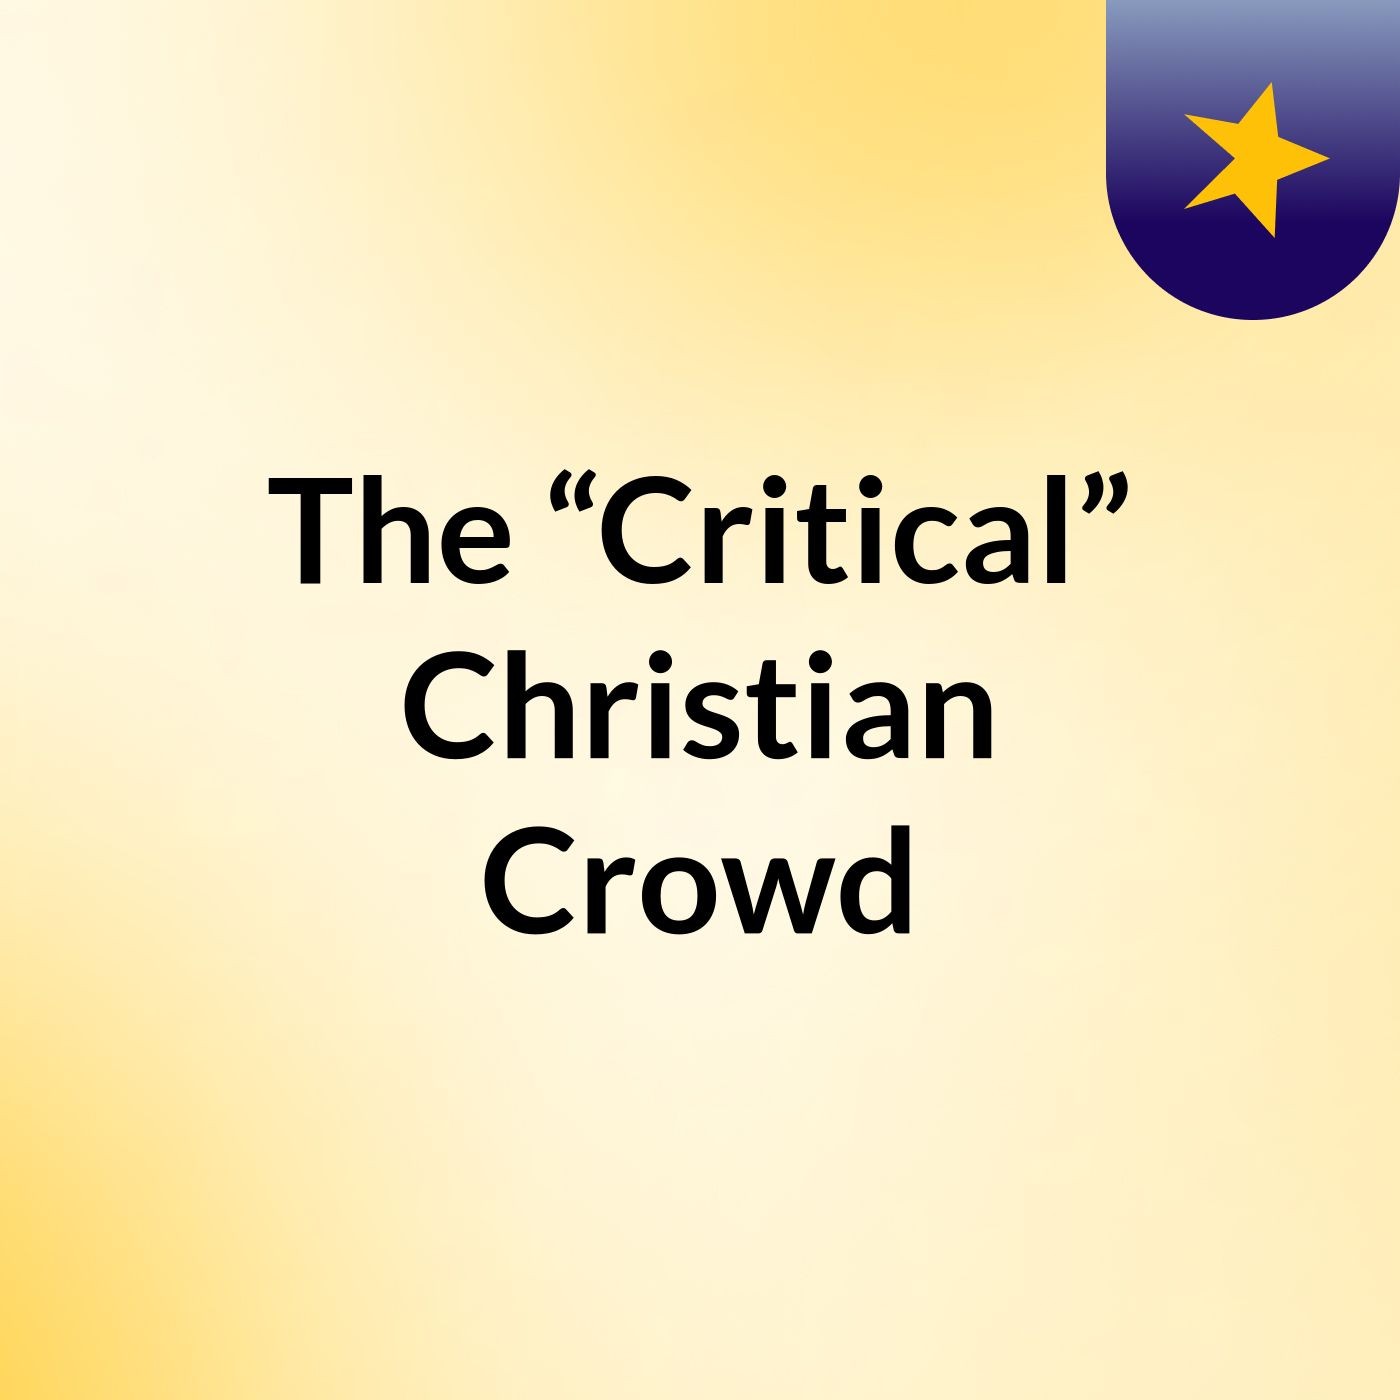 The “Critical” Christian Crowd